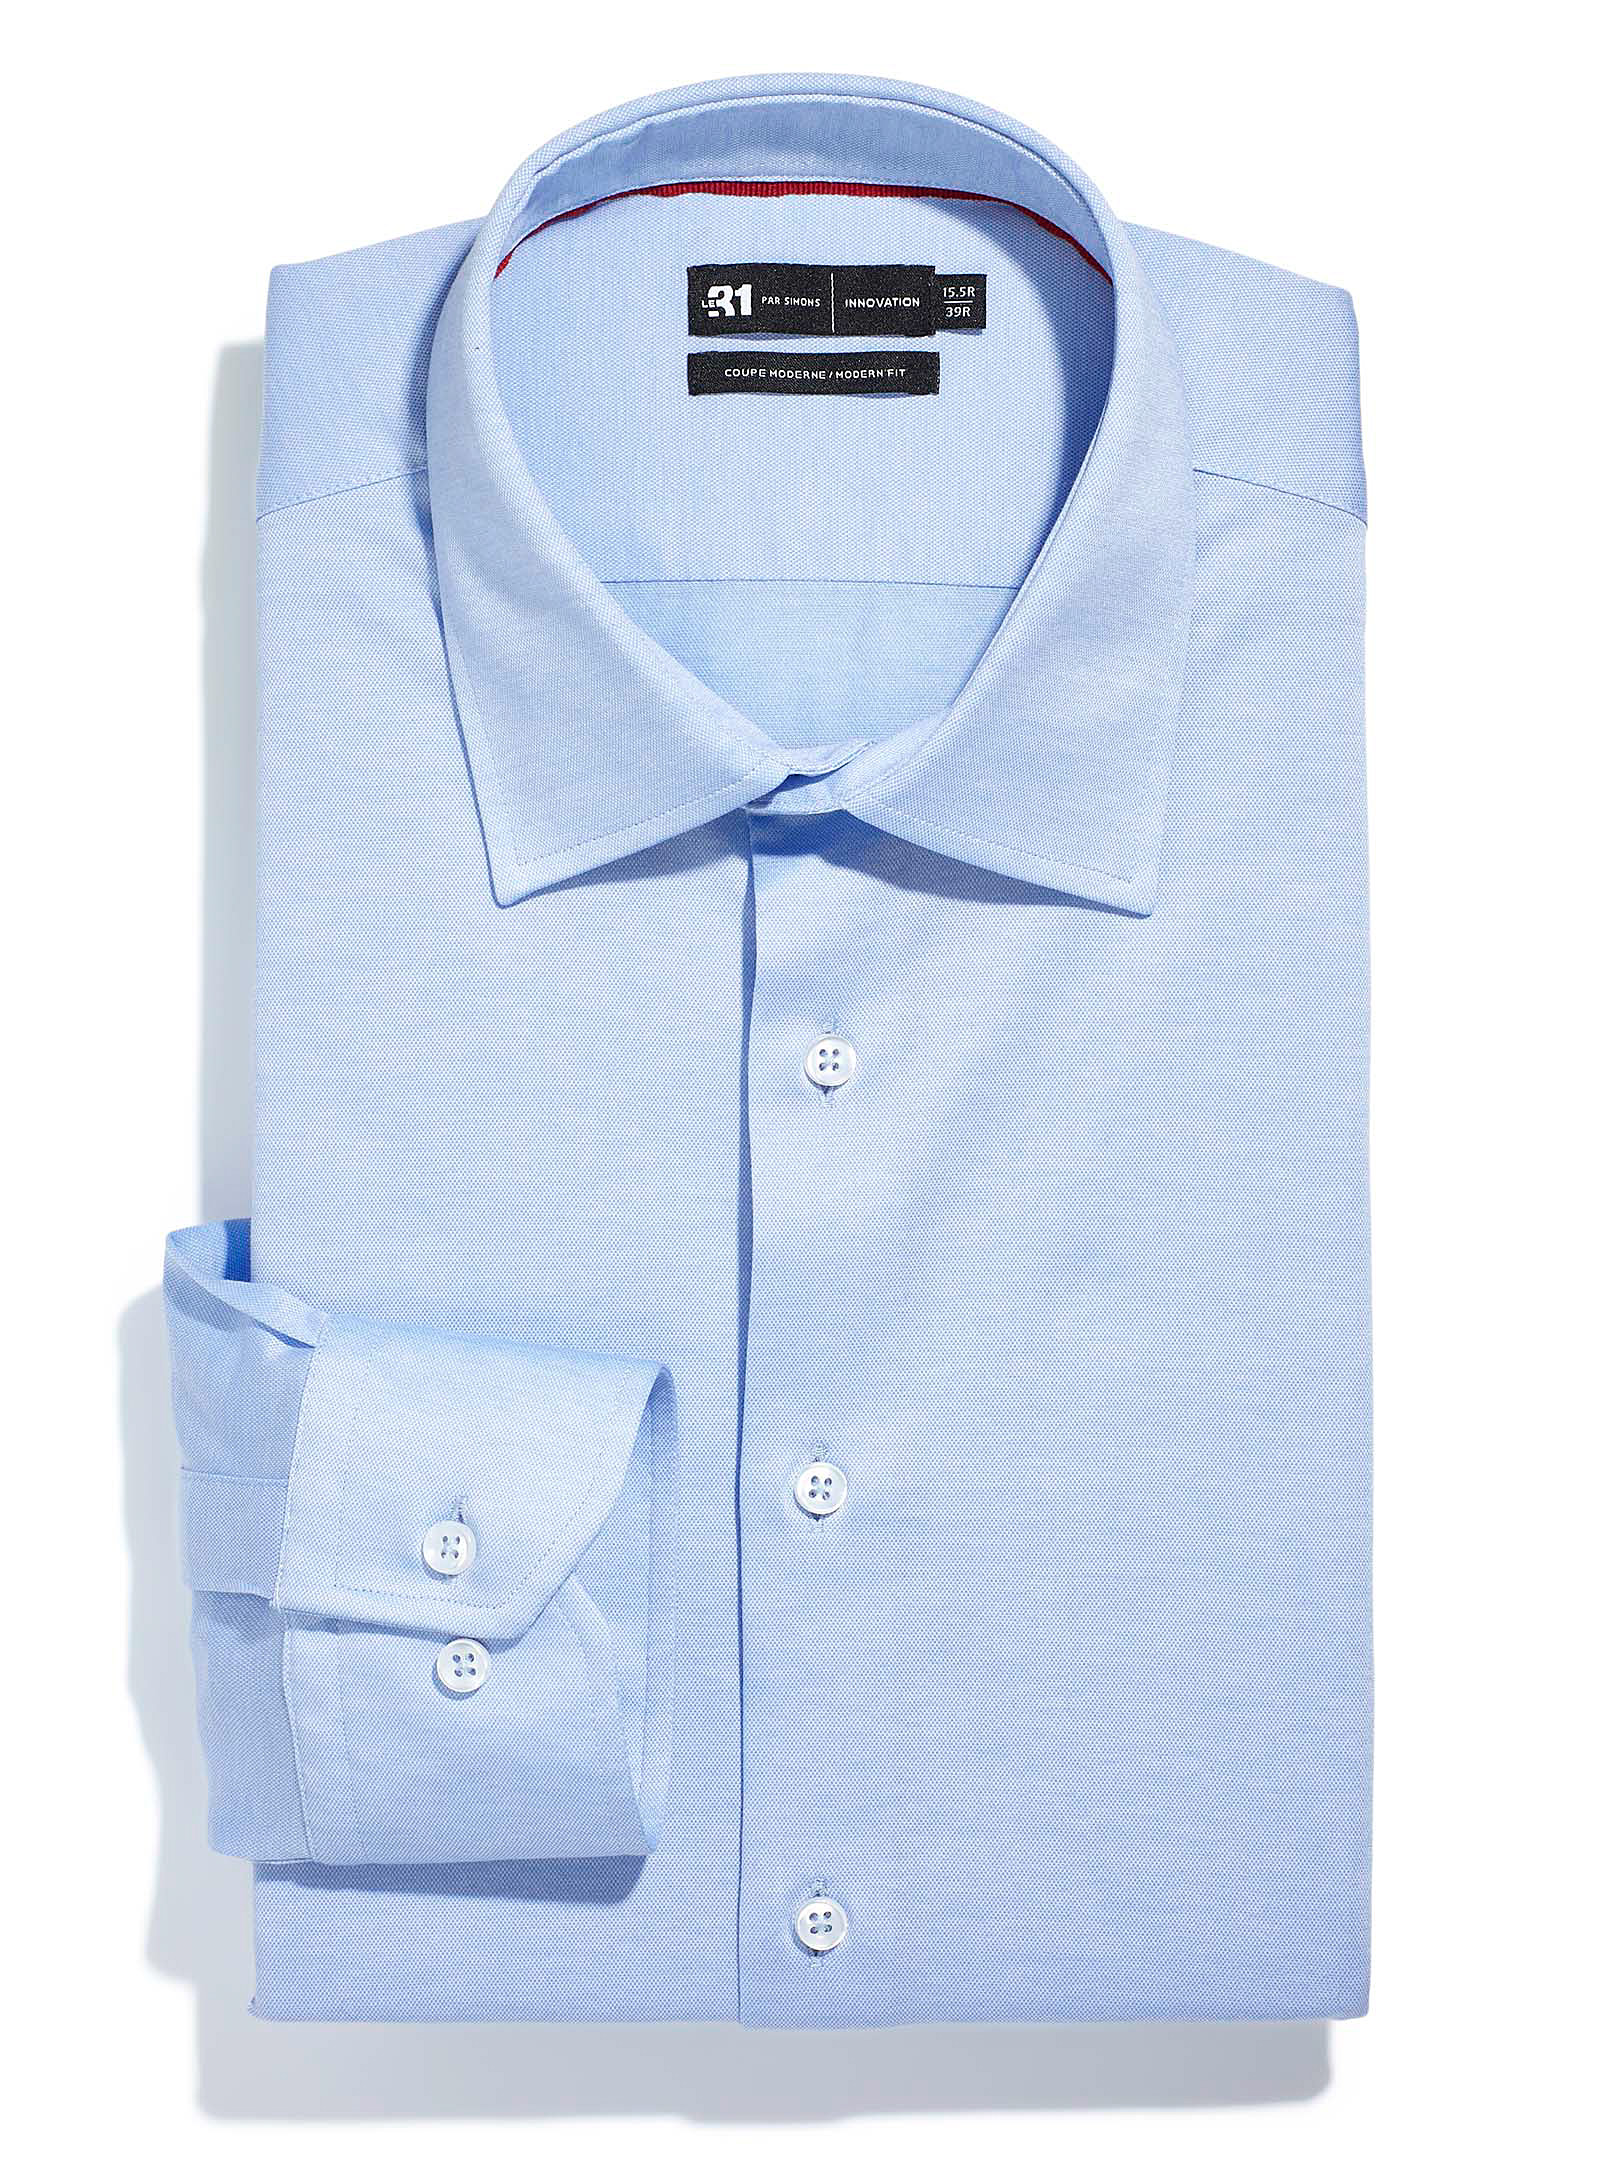 Le 31 Knit Shirt Modern Fit Innovation Collection In Baby Blue